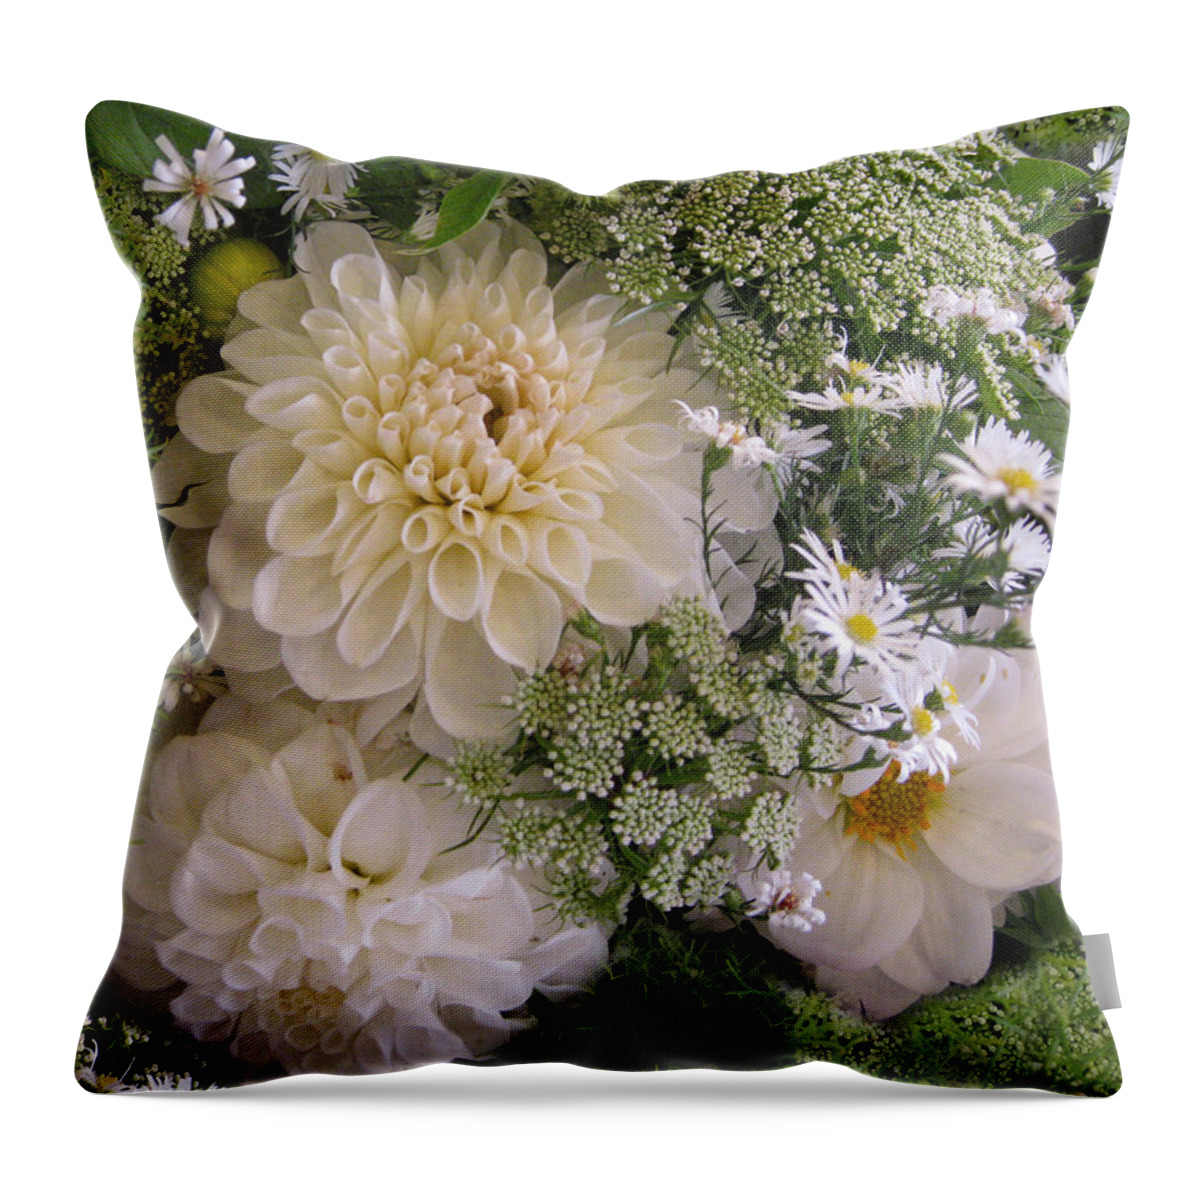 Flowers Throw Pillow featuring the photograph White Bouquet by Geraldine Alexander